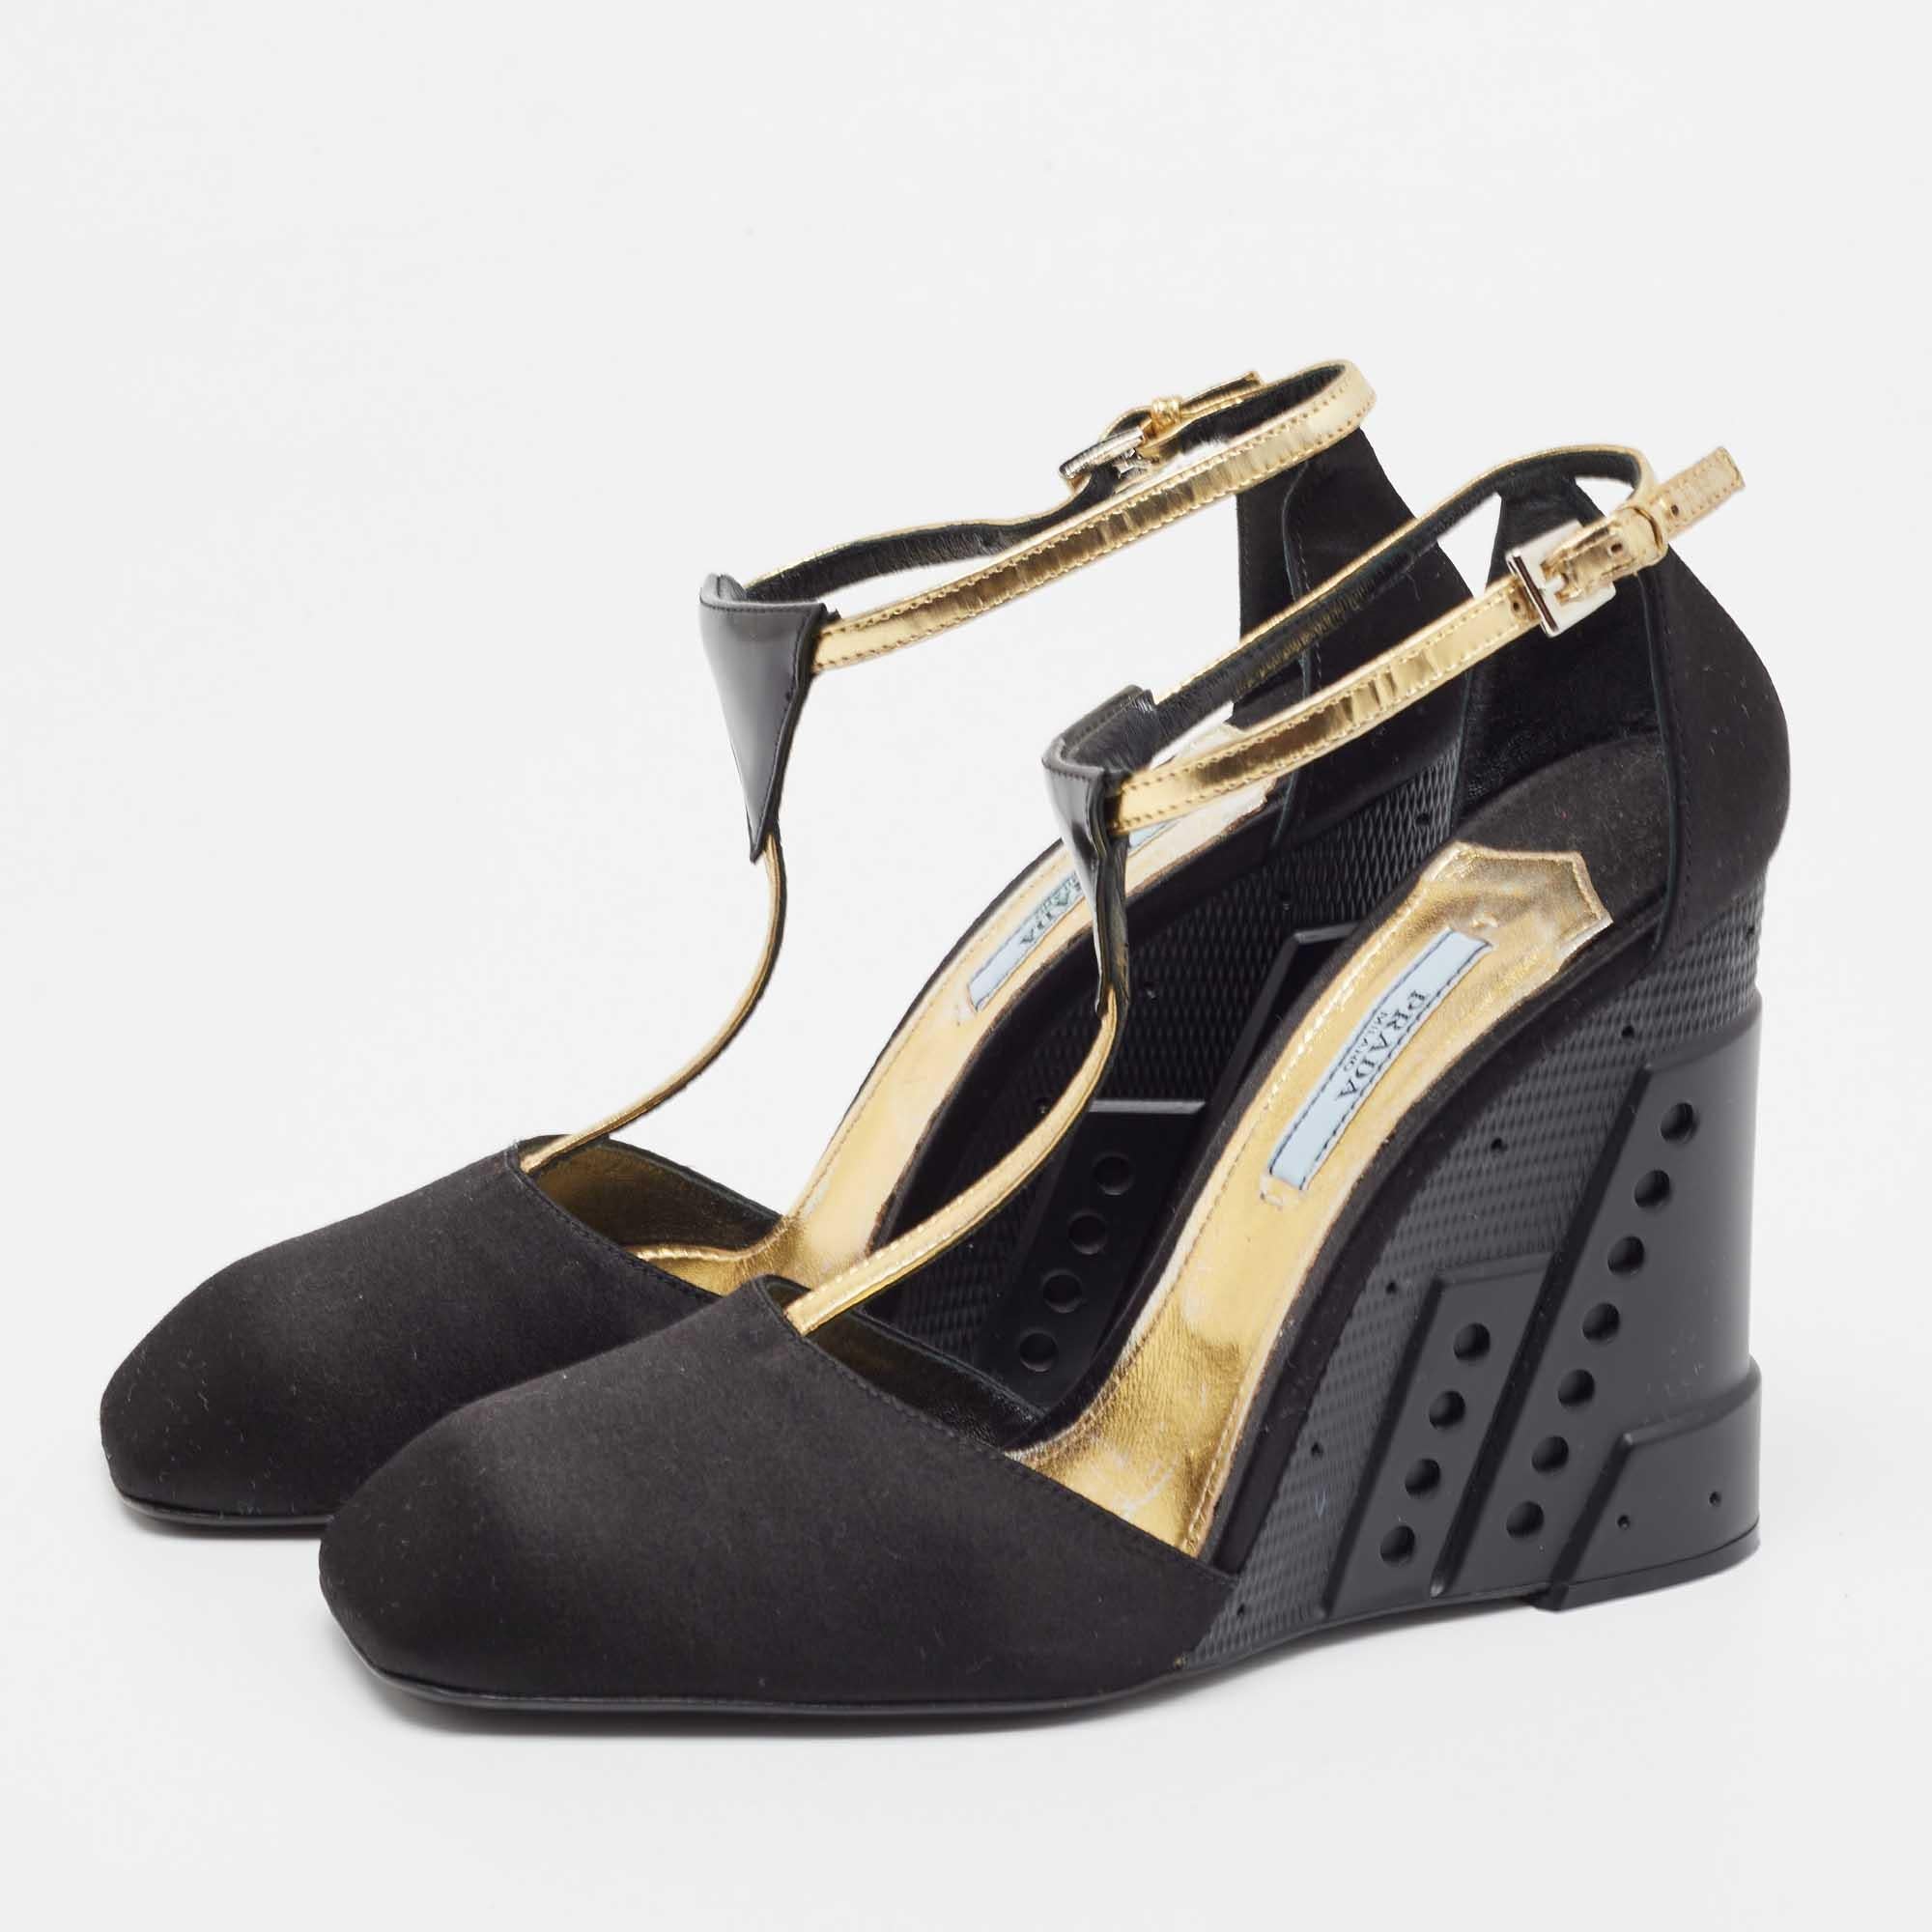 These Prada black wedge sandals will frame your feet in an elegant manner. Crafted from quality materials, they display a classy design and comfortable insoles.

